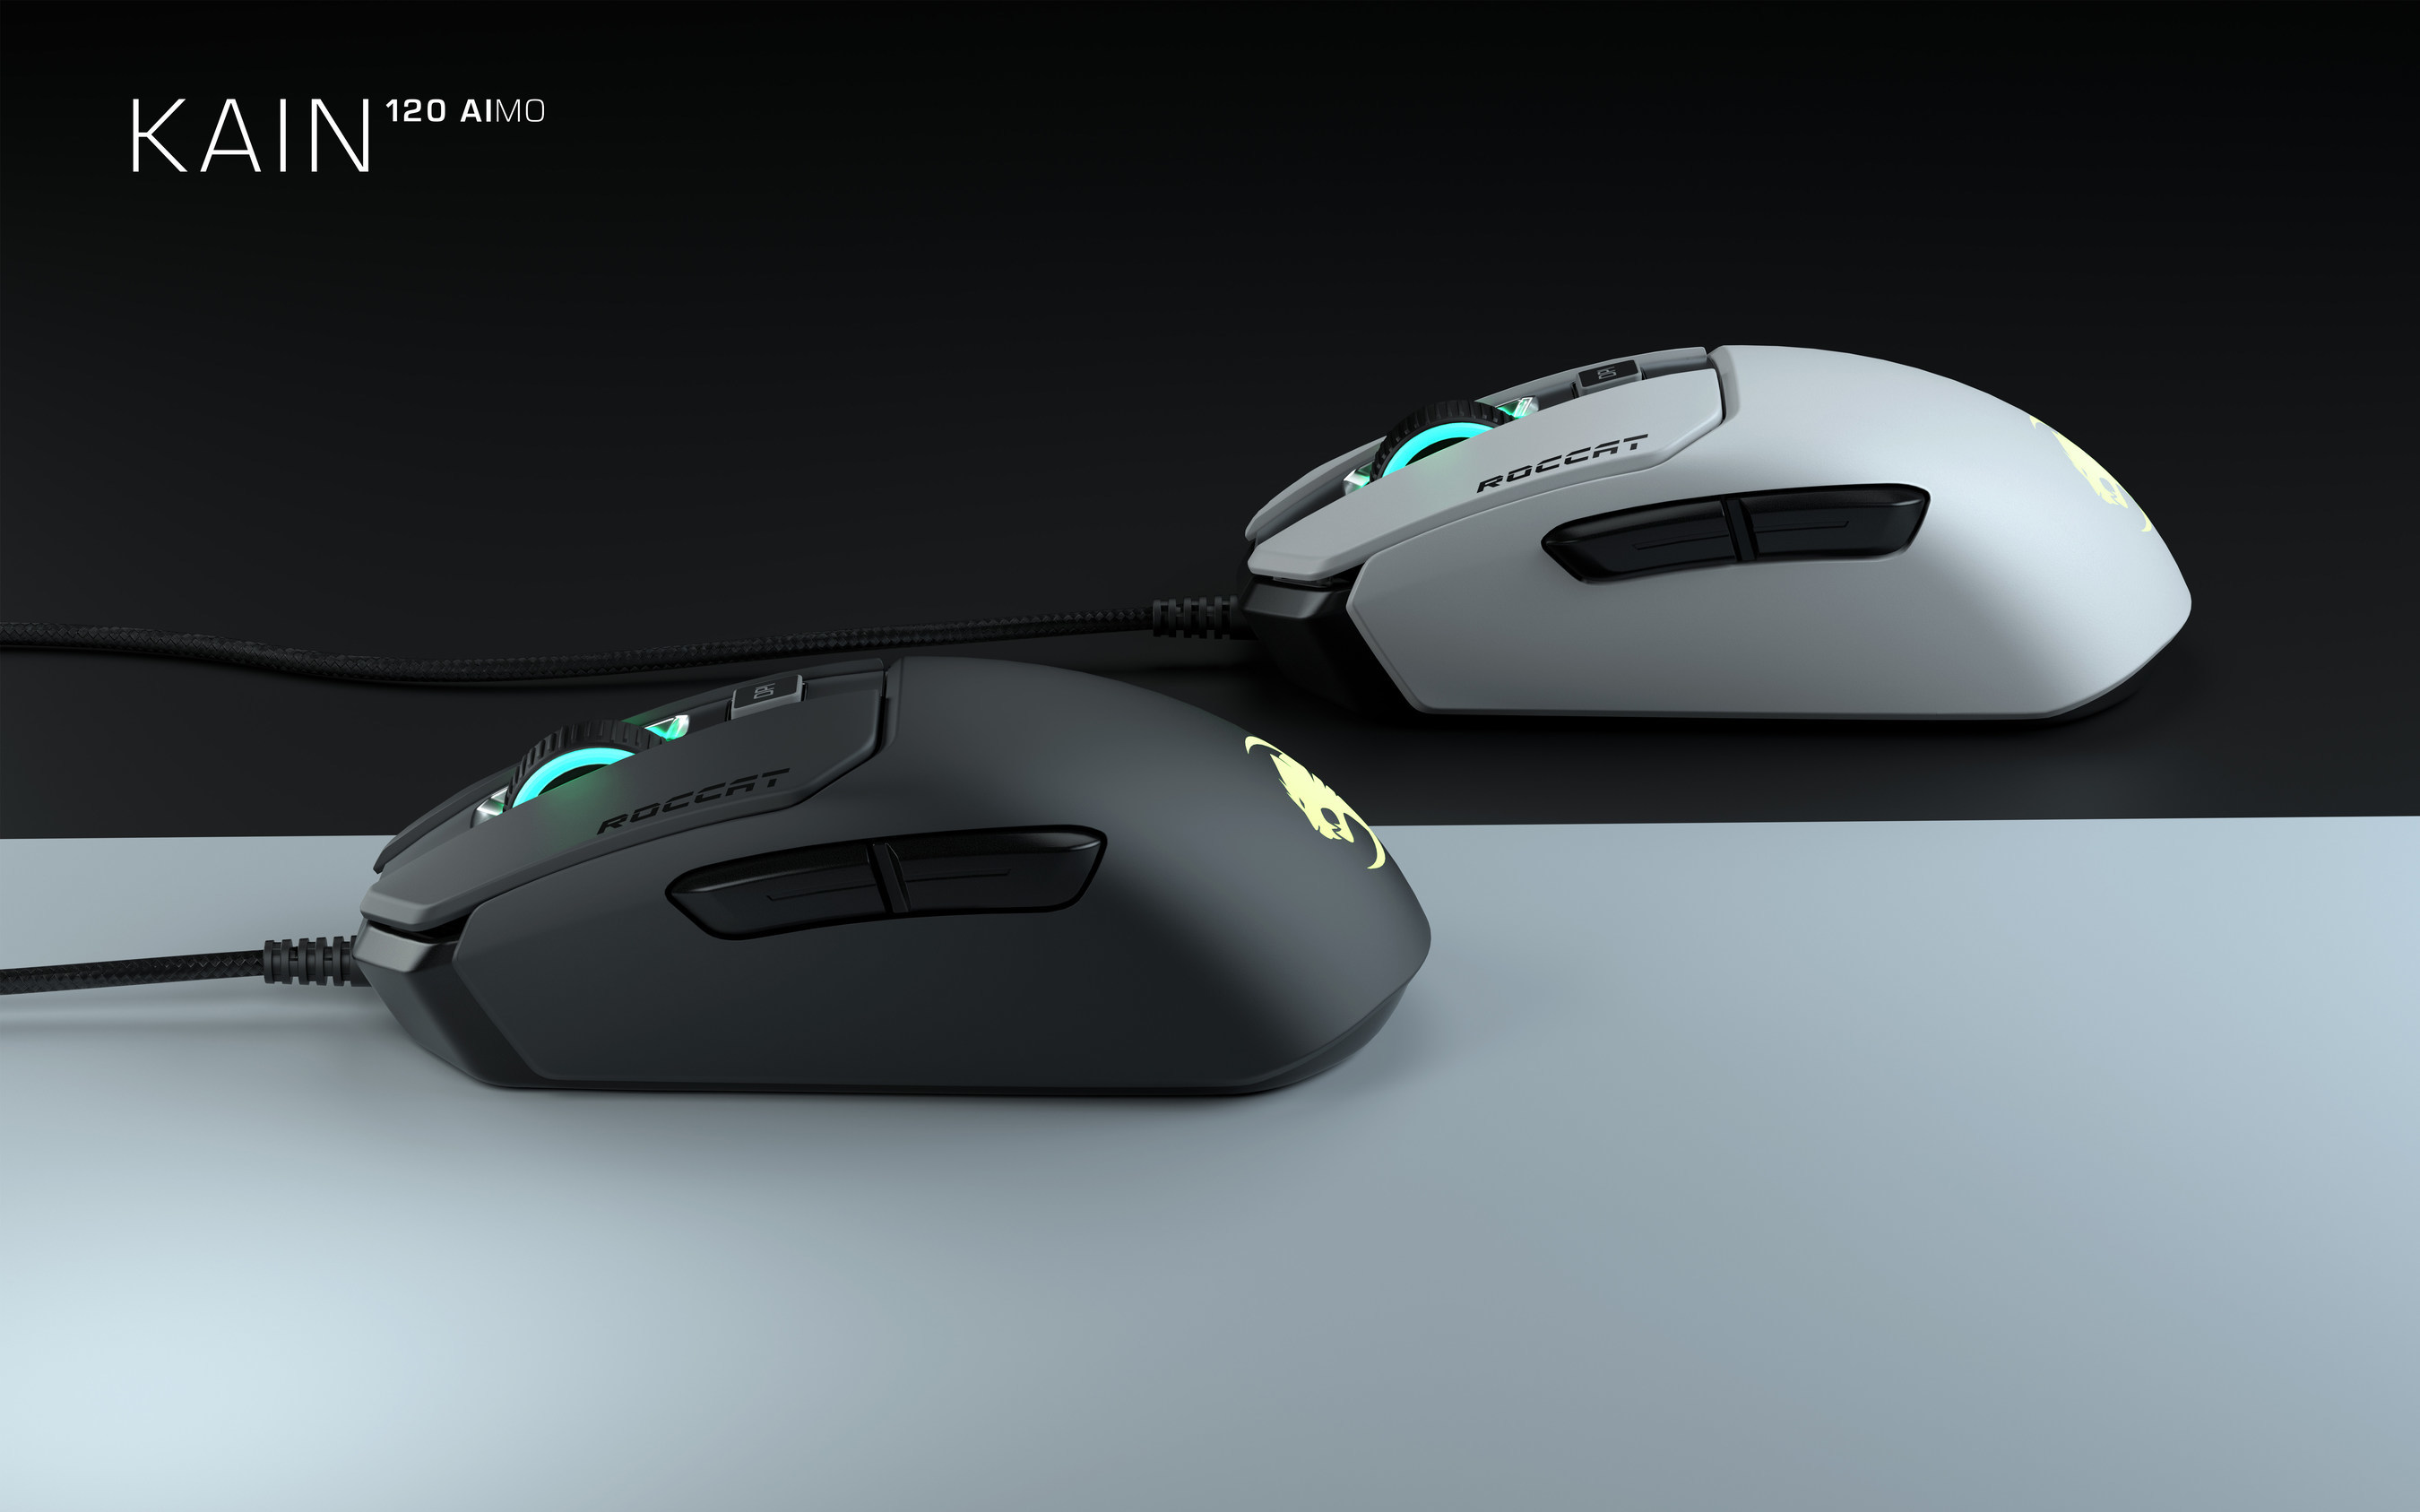 Roccat S All New Kain Gaming Mouse Series New Vulcan Keyboard Switch And Color Options And The Sense Aimo Pad Make Their European Debut At Gamescom 2019